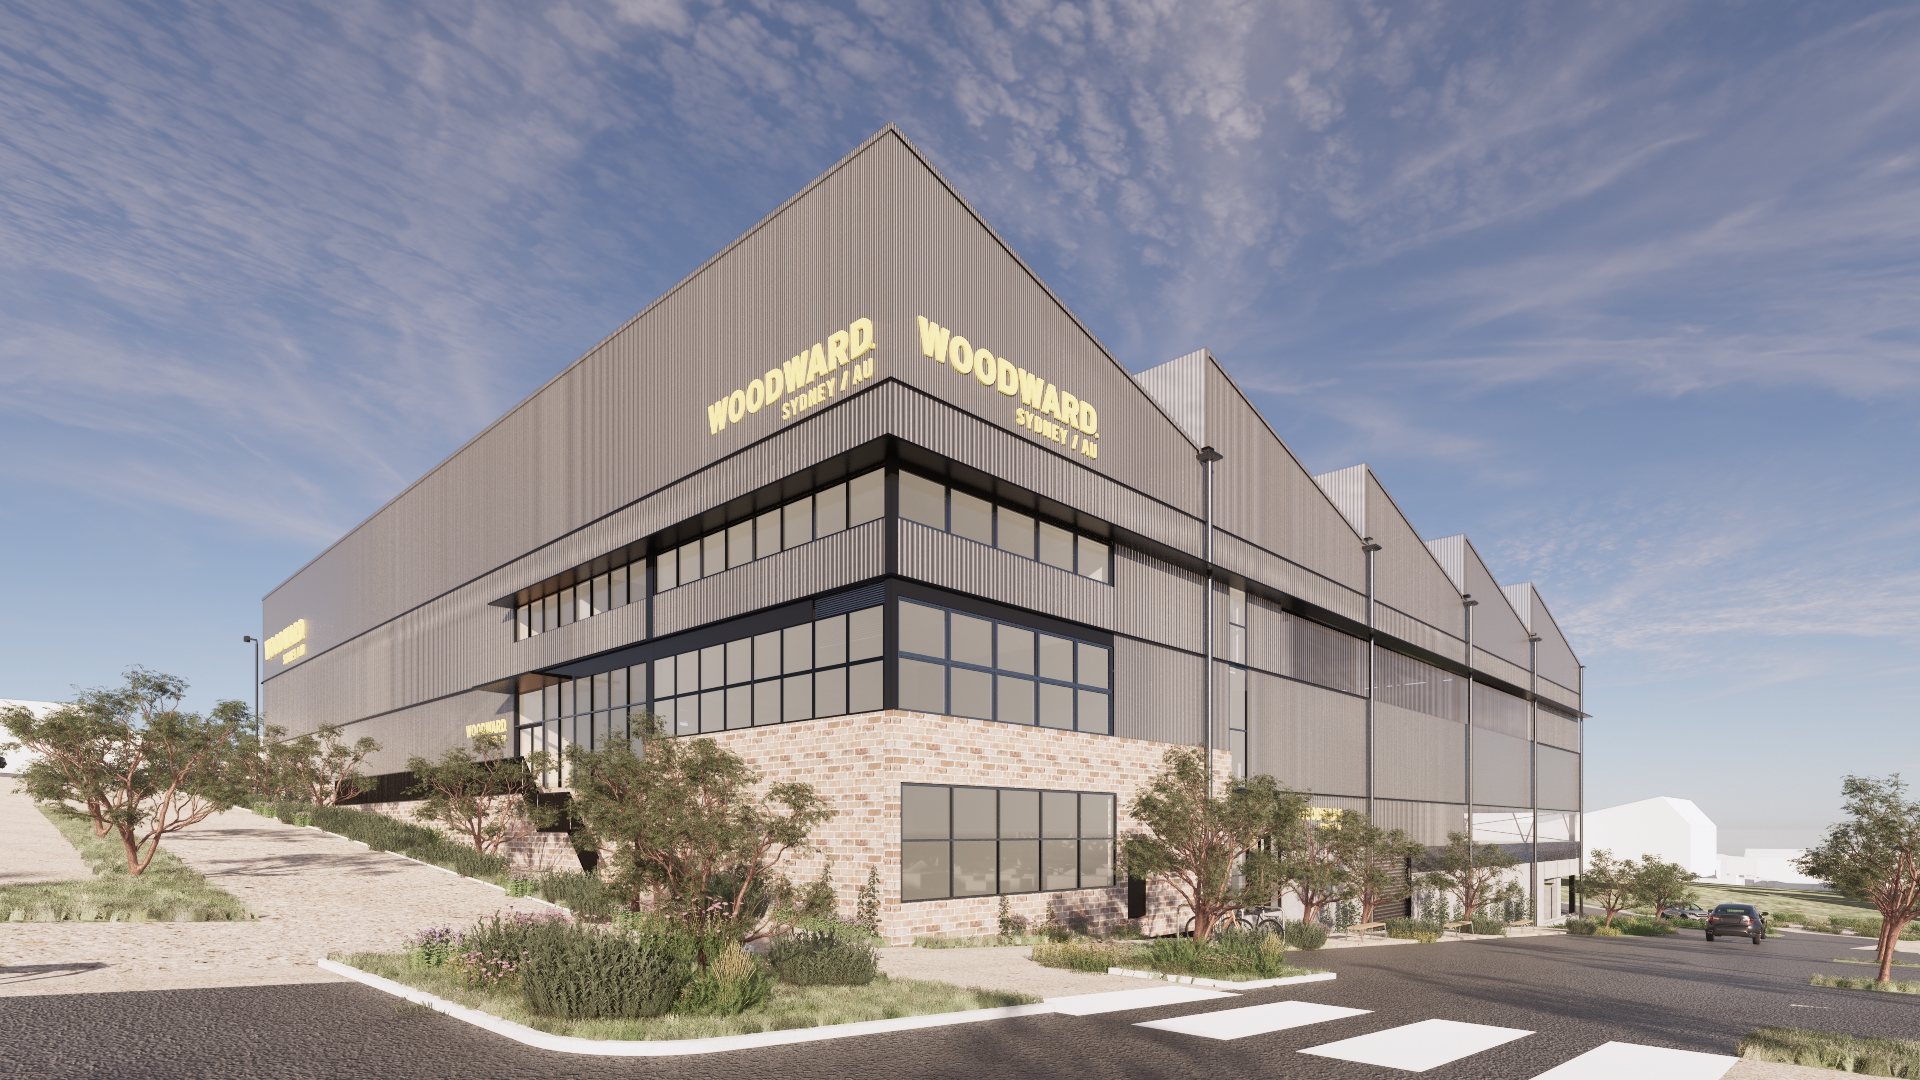   
																Coming Soon: Woodward’s First International Sports Facility Slated for Australia 
															 